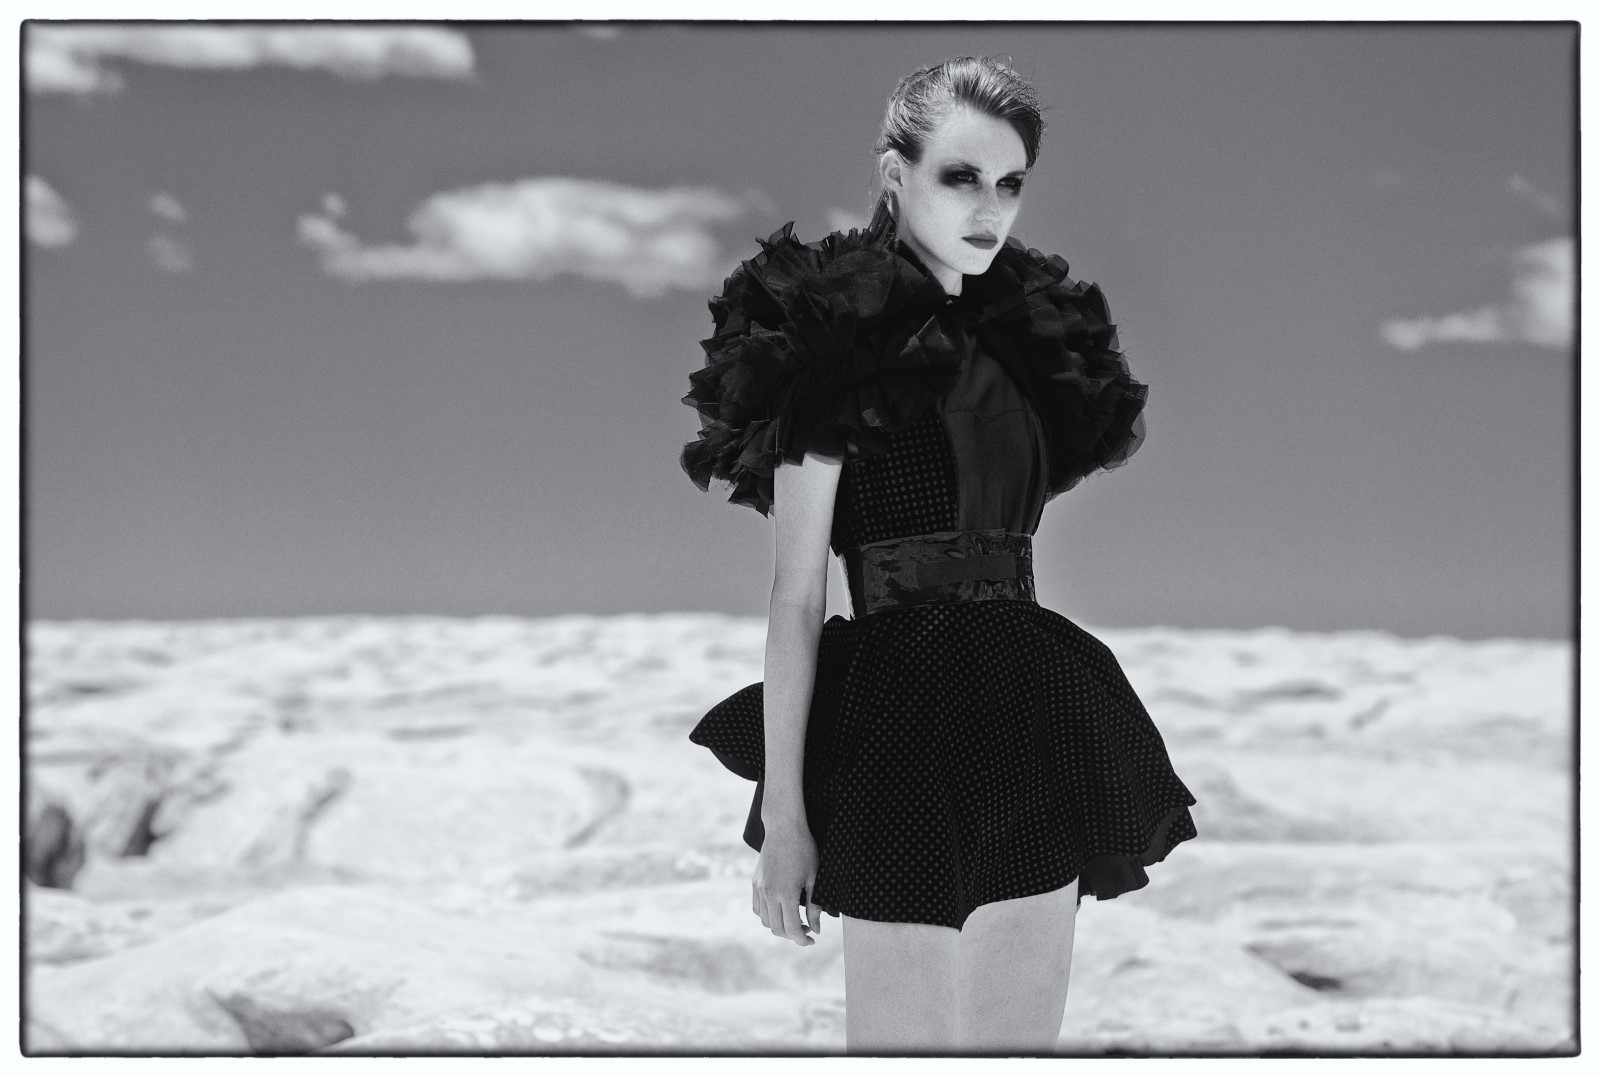 Fashion Magazine Photography Sydney, The Girls Who Fell To Earth, Spotted black dress with ruffled sleves in a hostile moonscape landscape. Photo by Kent Johnson.